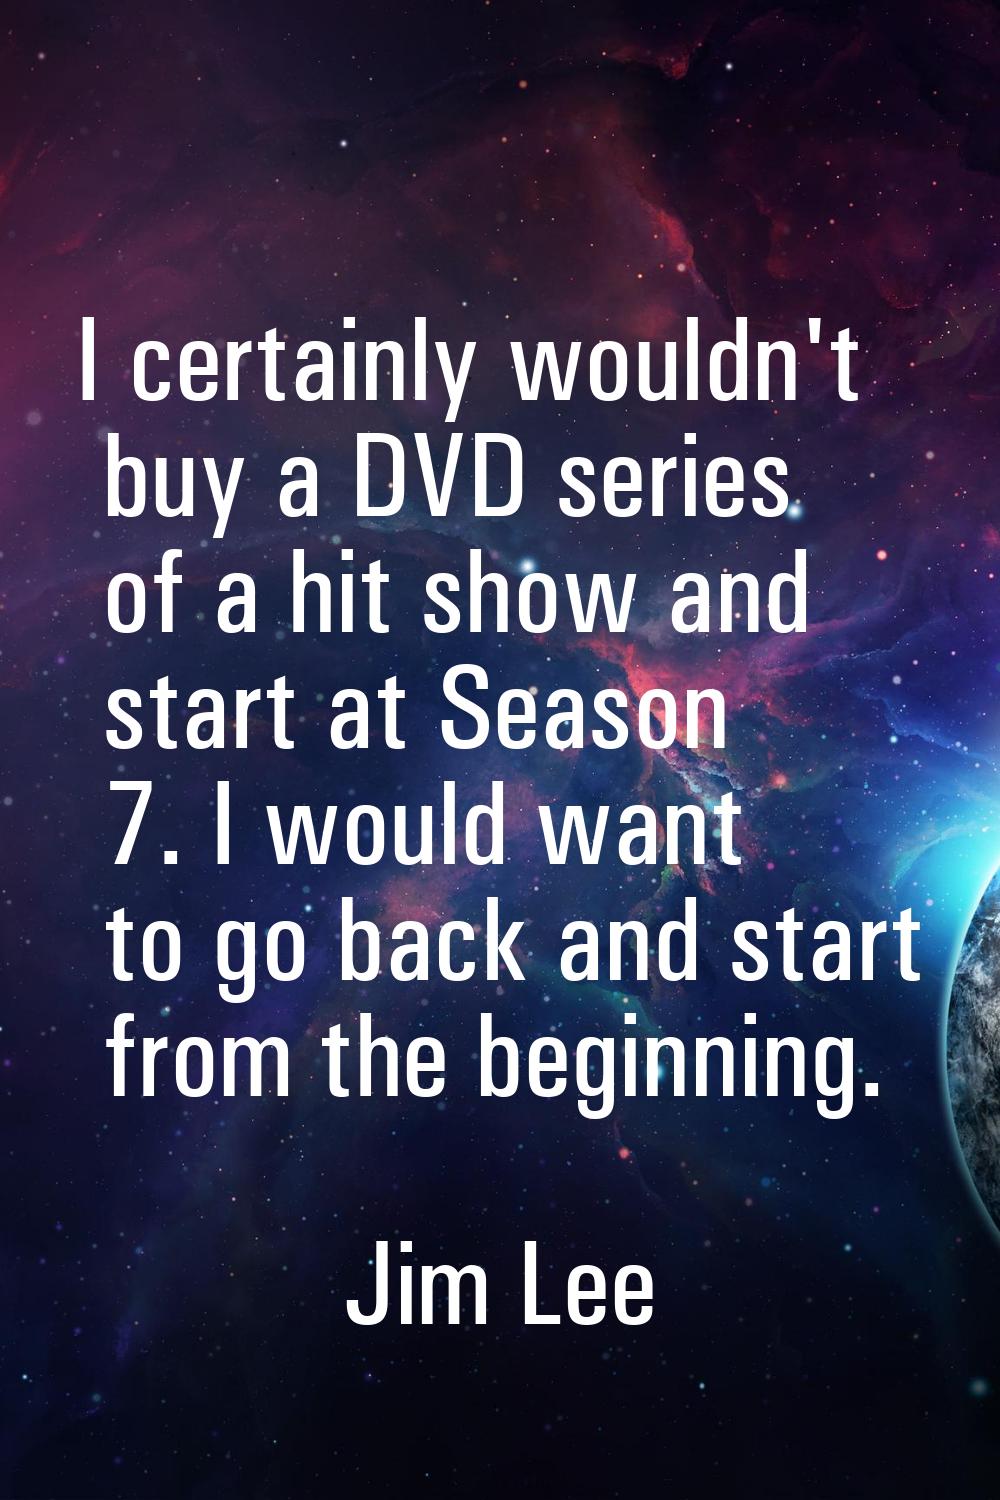 I certainly wouldn't buy a DVD series of a hit show and start at Season 7. I would want to go back 